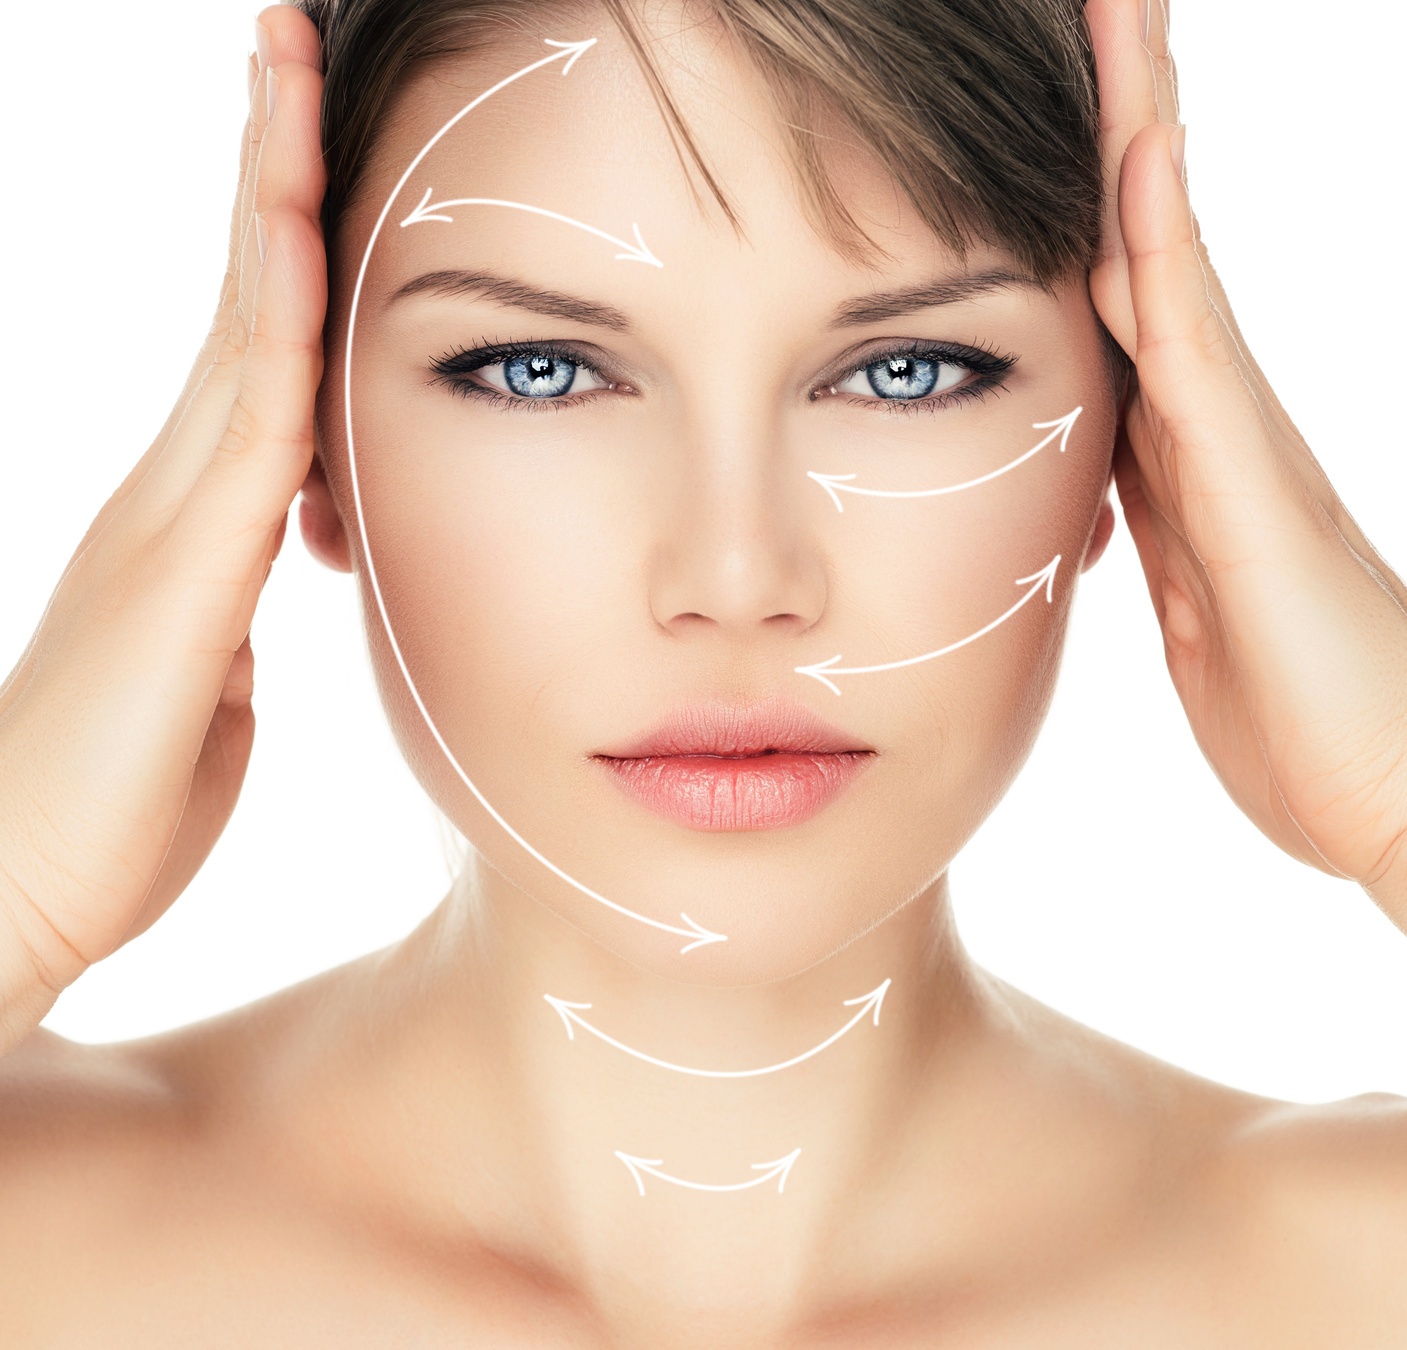 The Difference Between a Laser Skin Treatment and an IPL Treatment